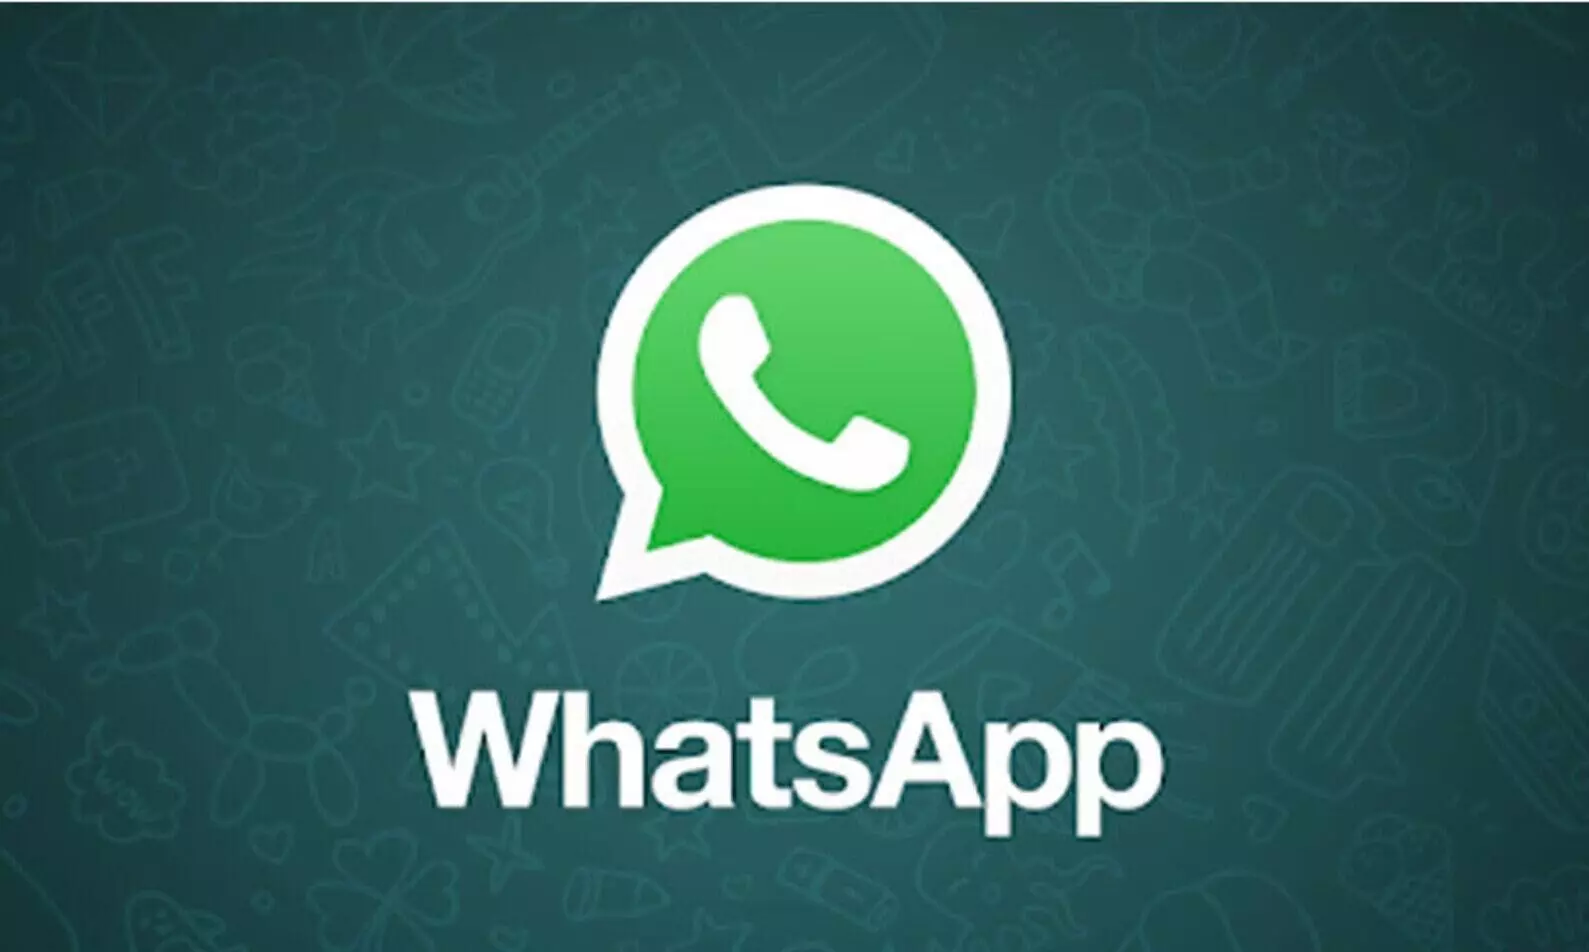 WhatsApp removed 10 lakh plus accounts in February: report